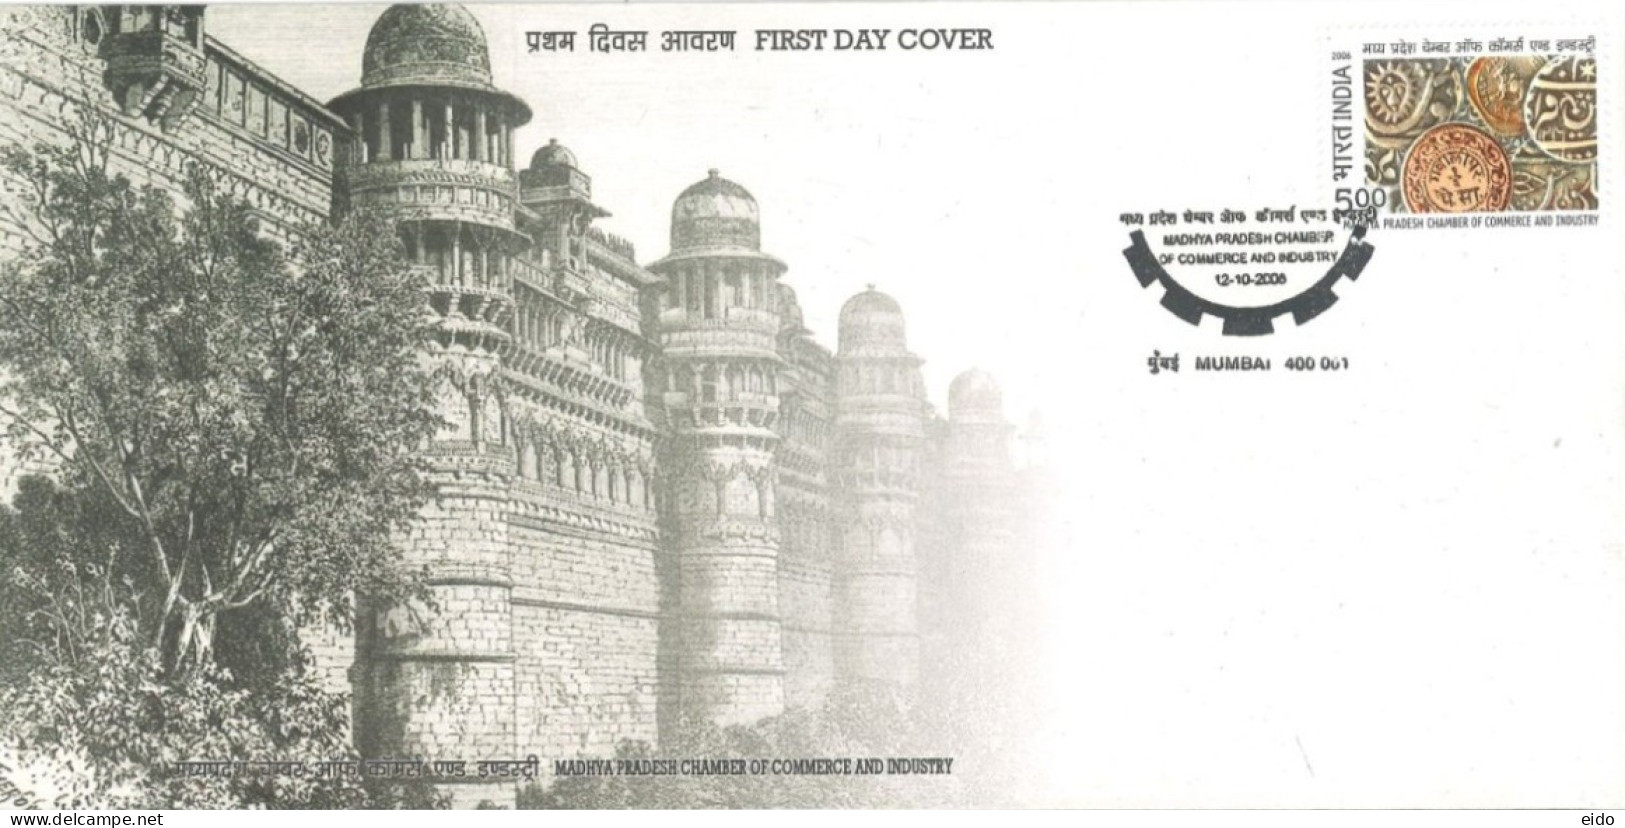 INDIA - 2006 - FDC STAMP OF MADHYA PRADESH CHAMBER OF COMMERCE AND INDUSTRY. - Lettres & Documents